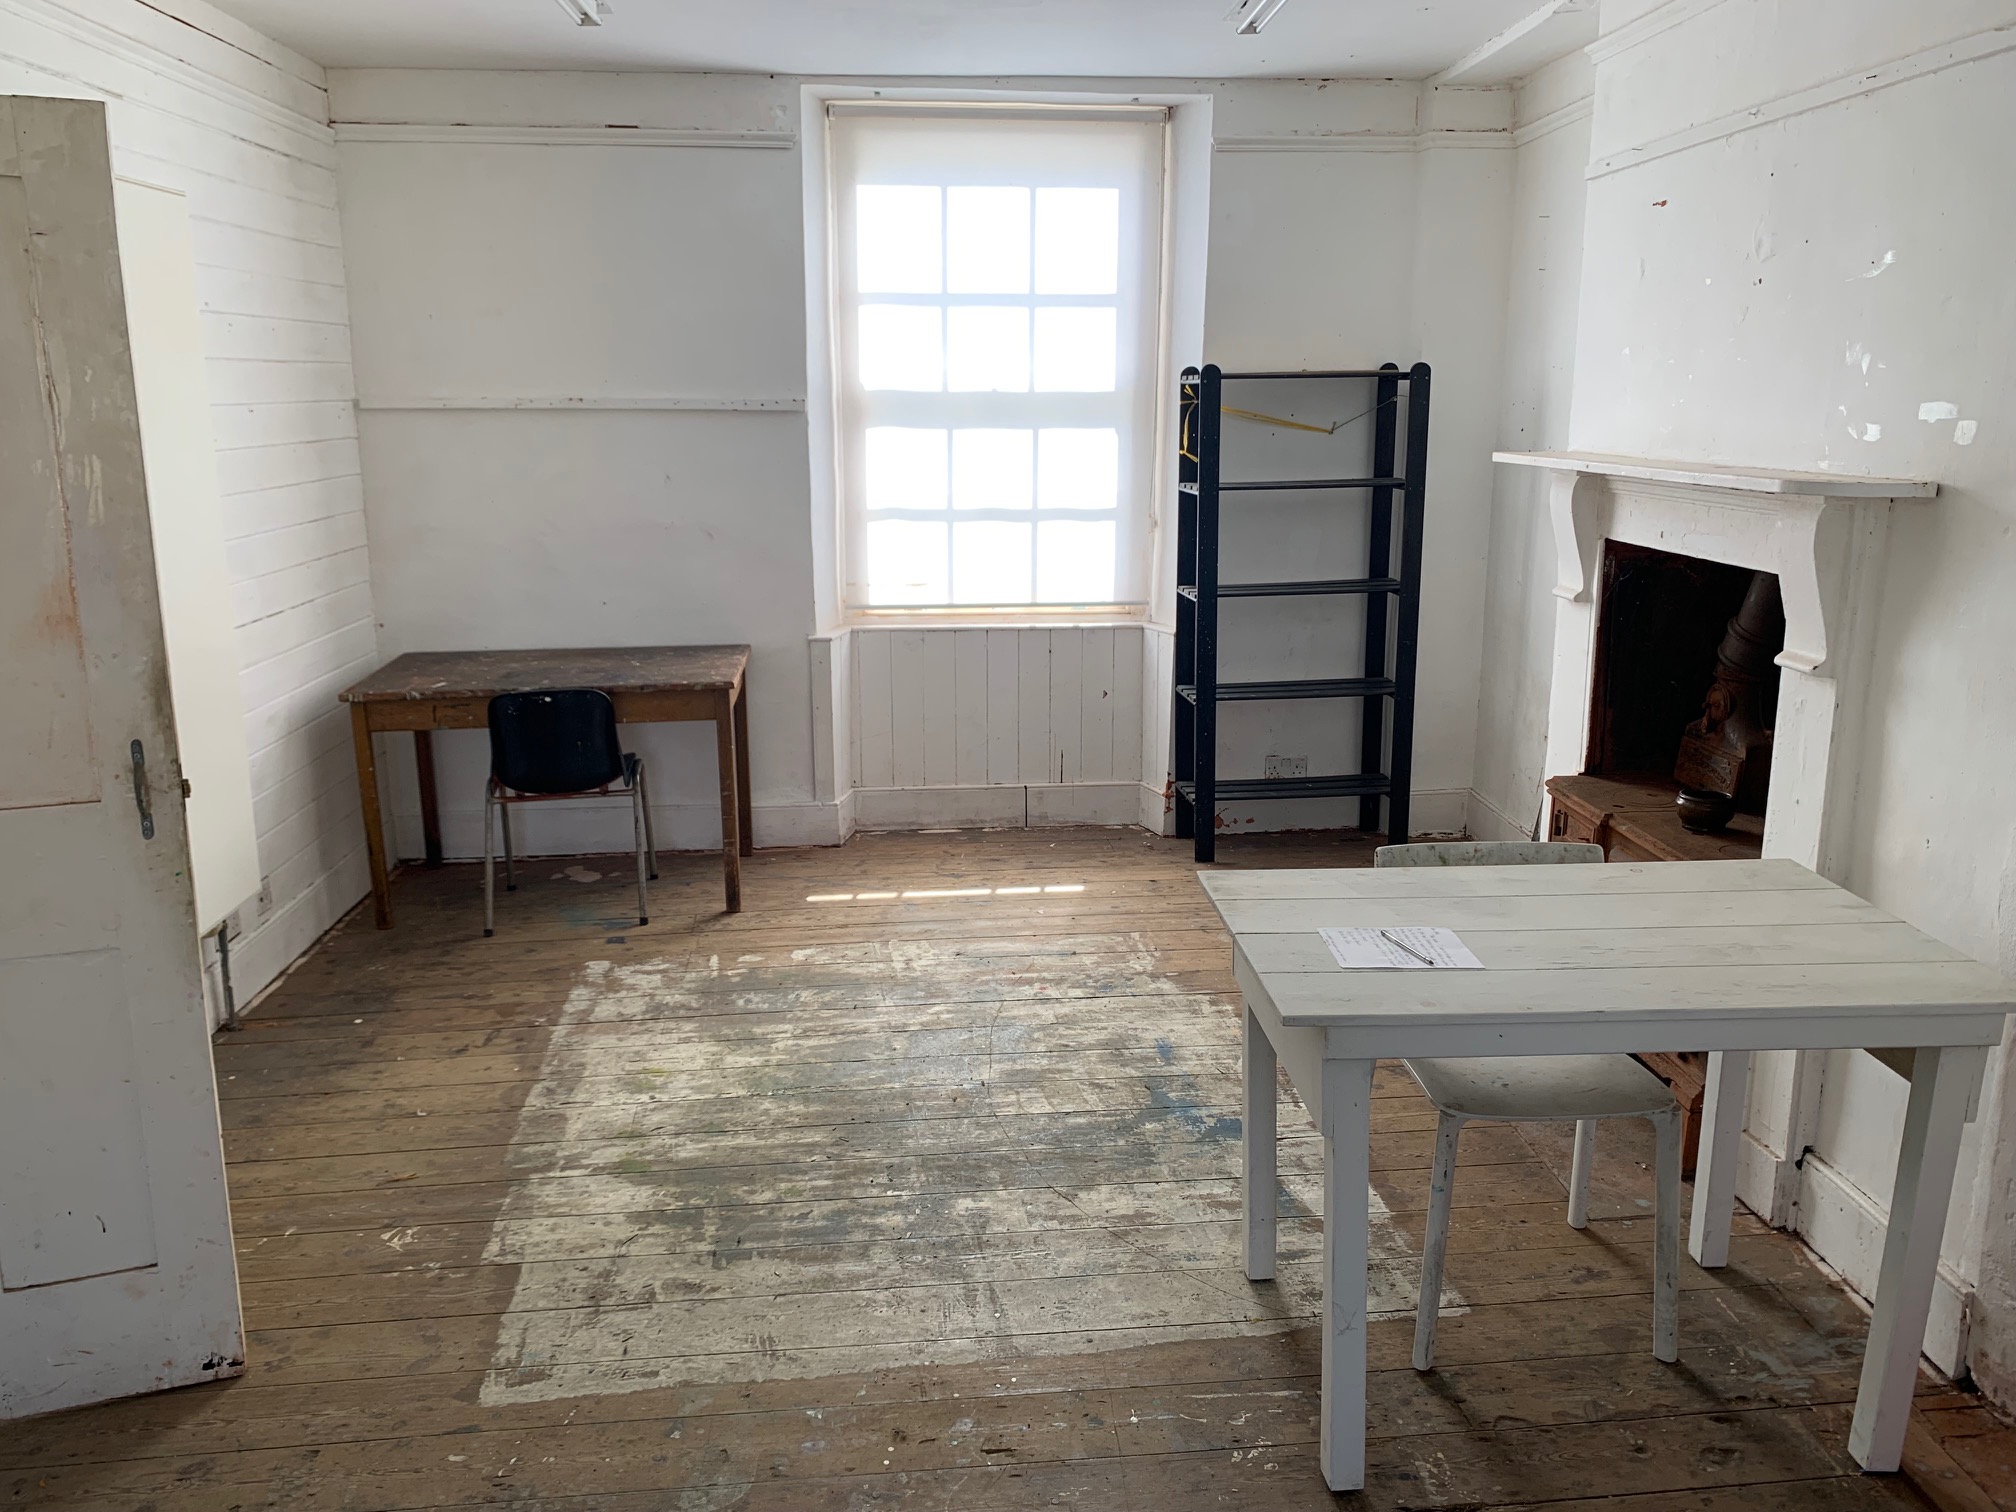 Photograph of a room with wooden floor and white walls. A studio.